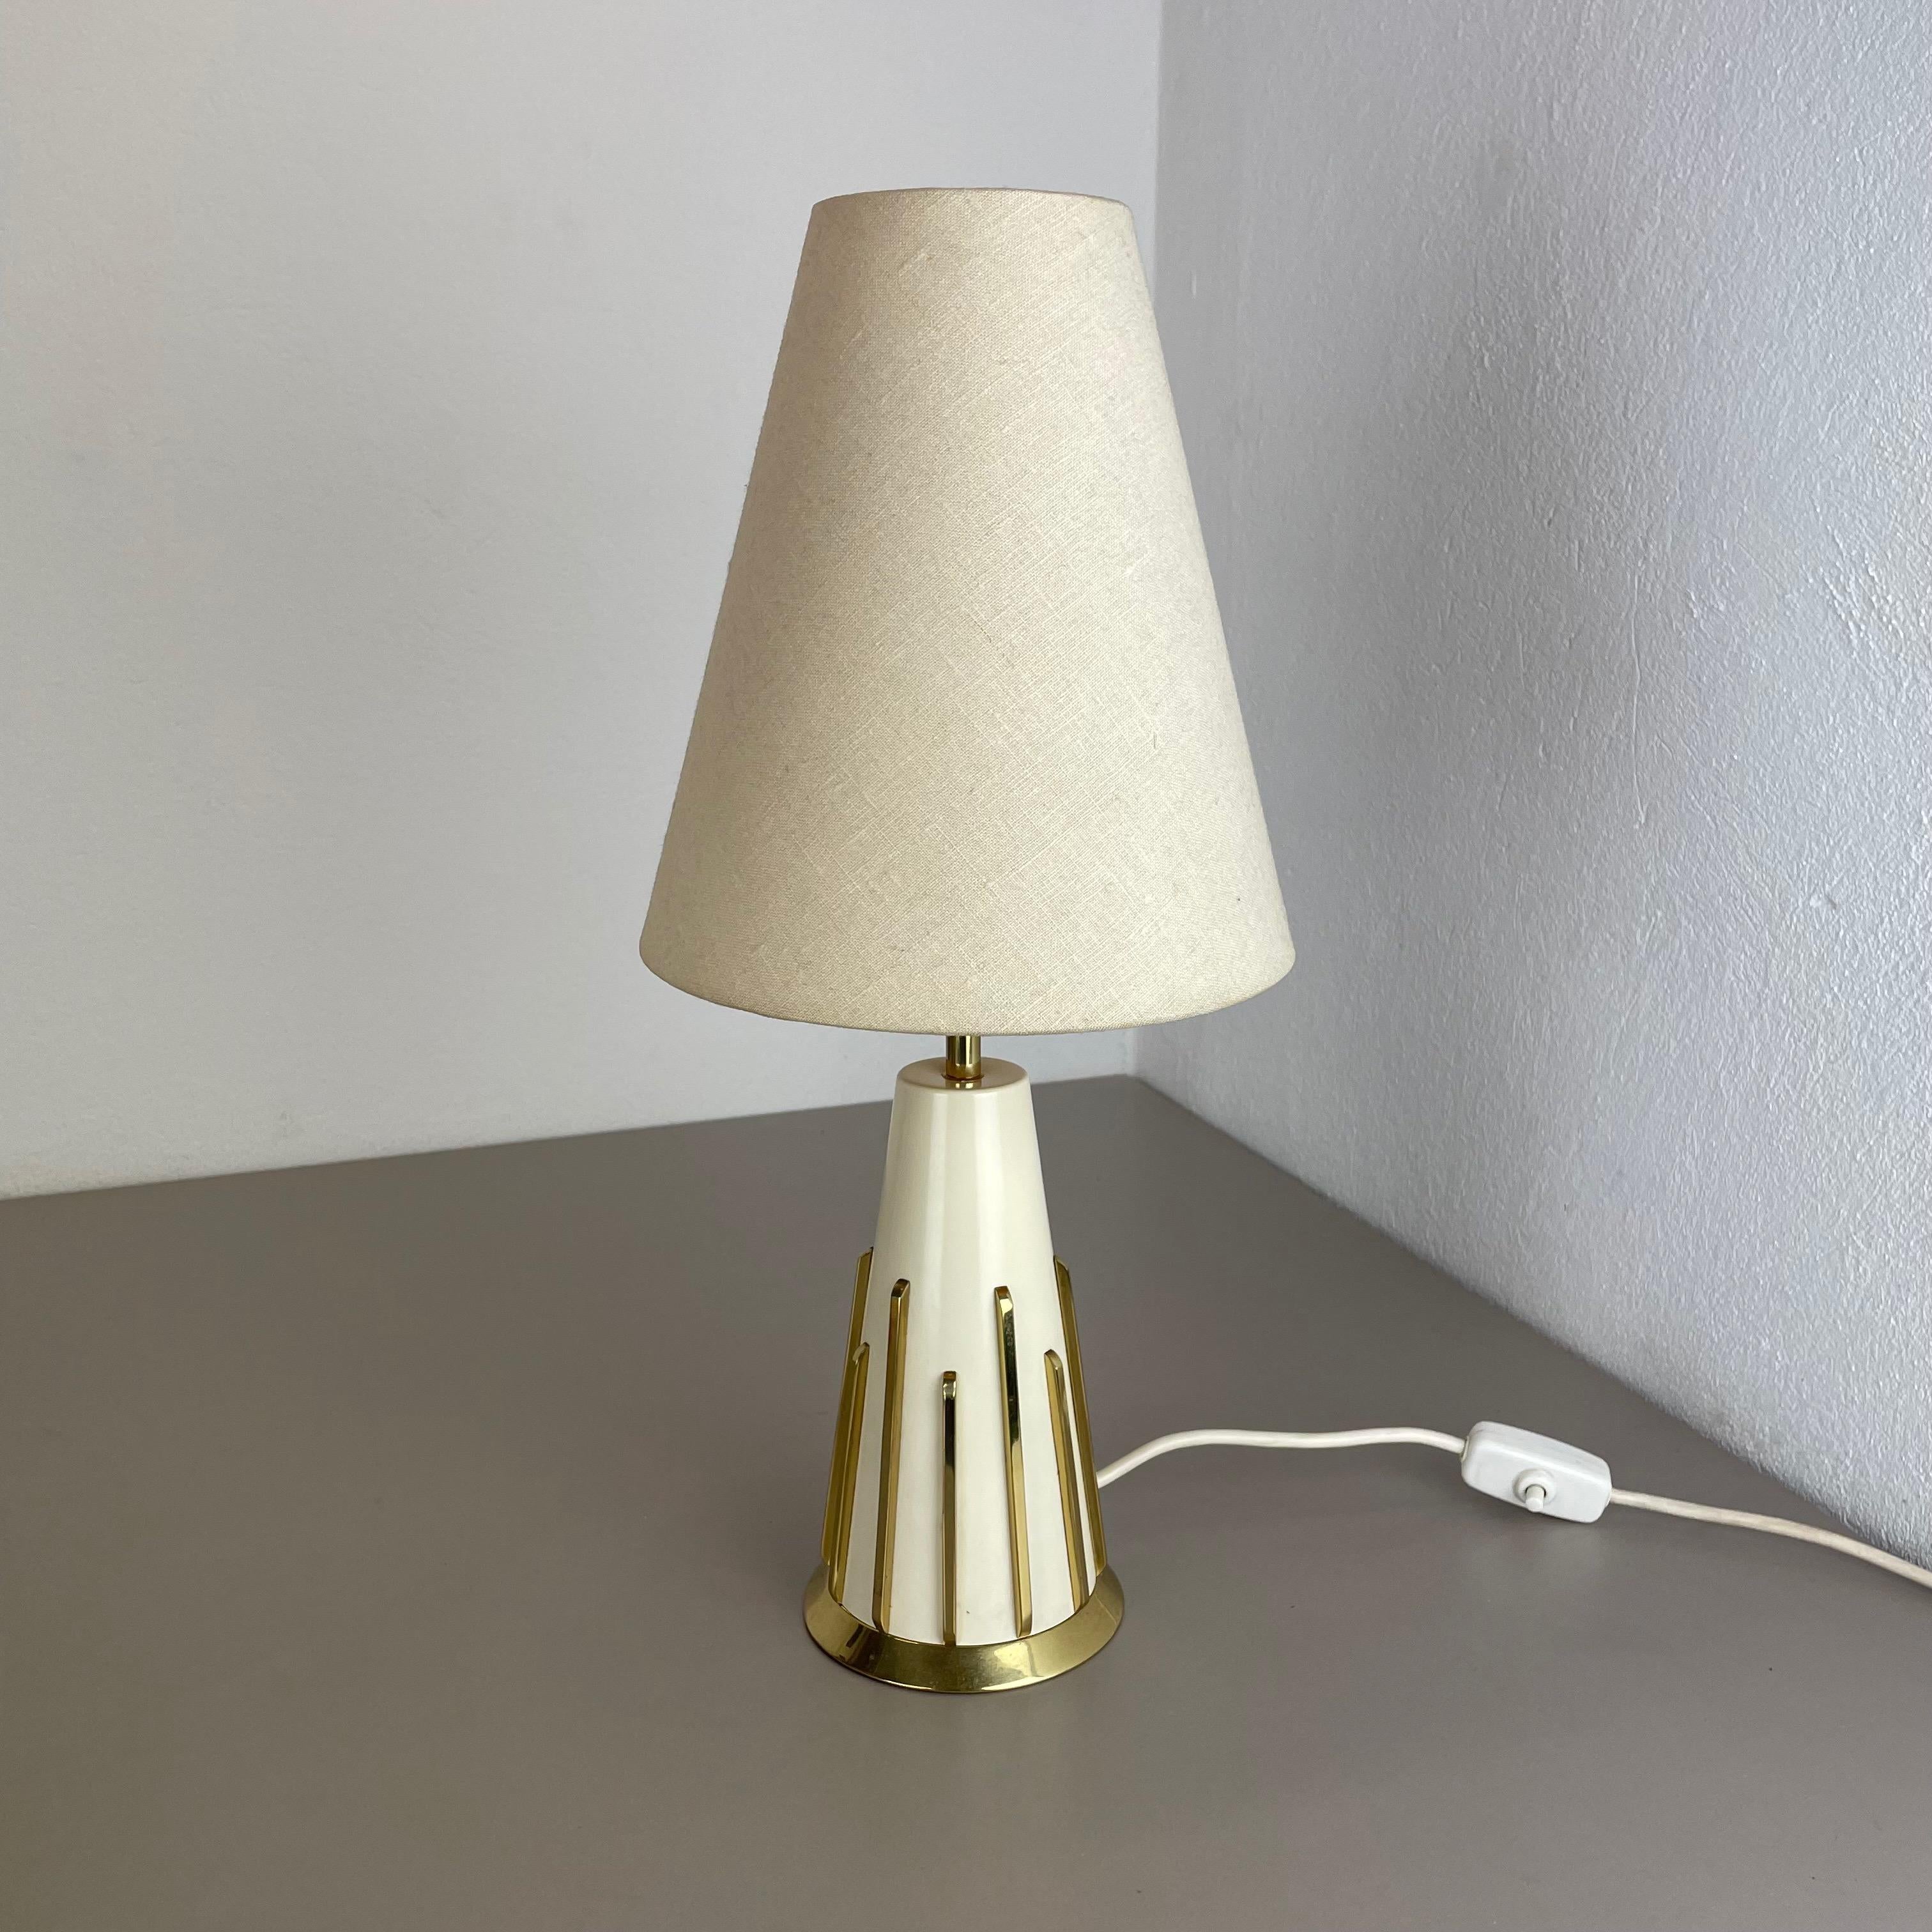 Article:

modernist table light in style of Stilnovo design


Origin:

Italy


Decade:

1950s





This original vintage light was designed and produced in the 1950s in Italy. The light base is made of metal in beige tone with a